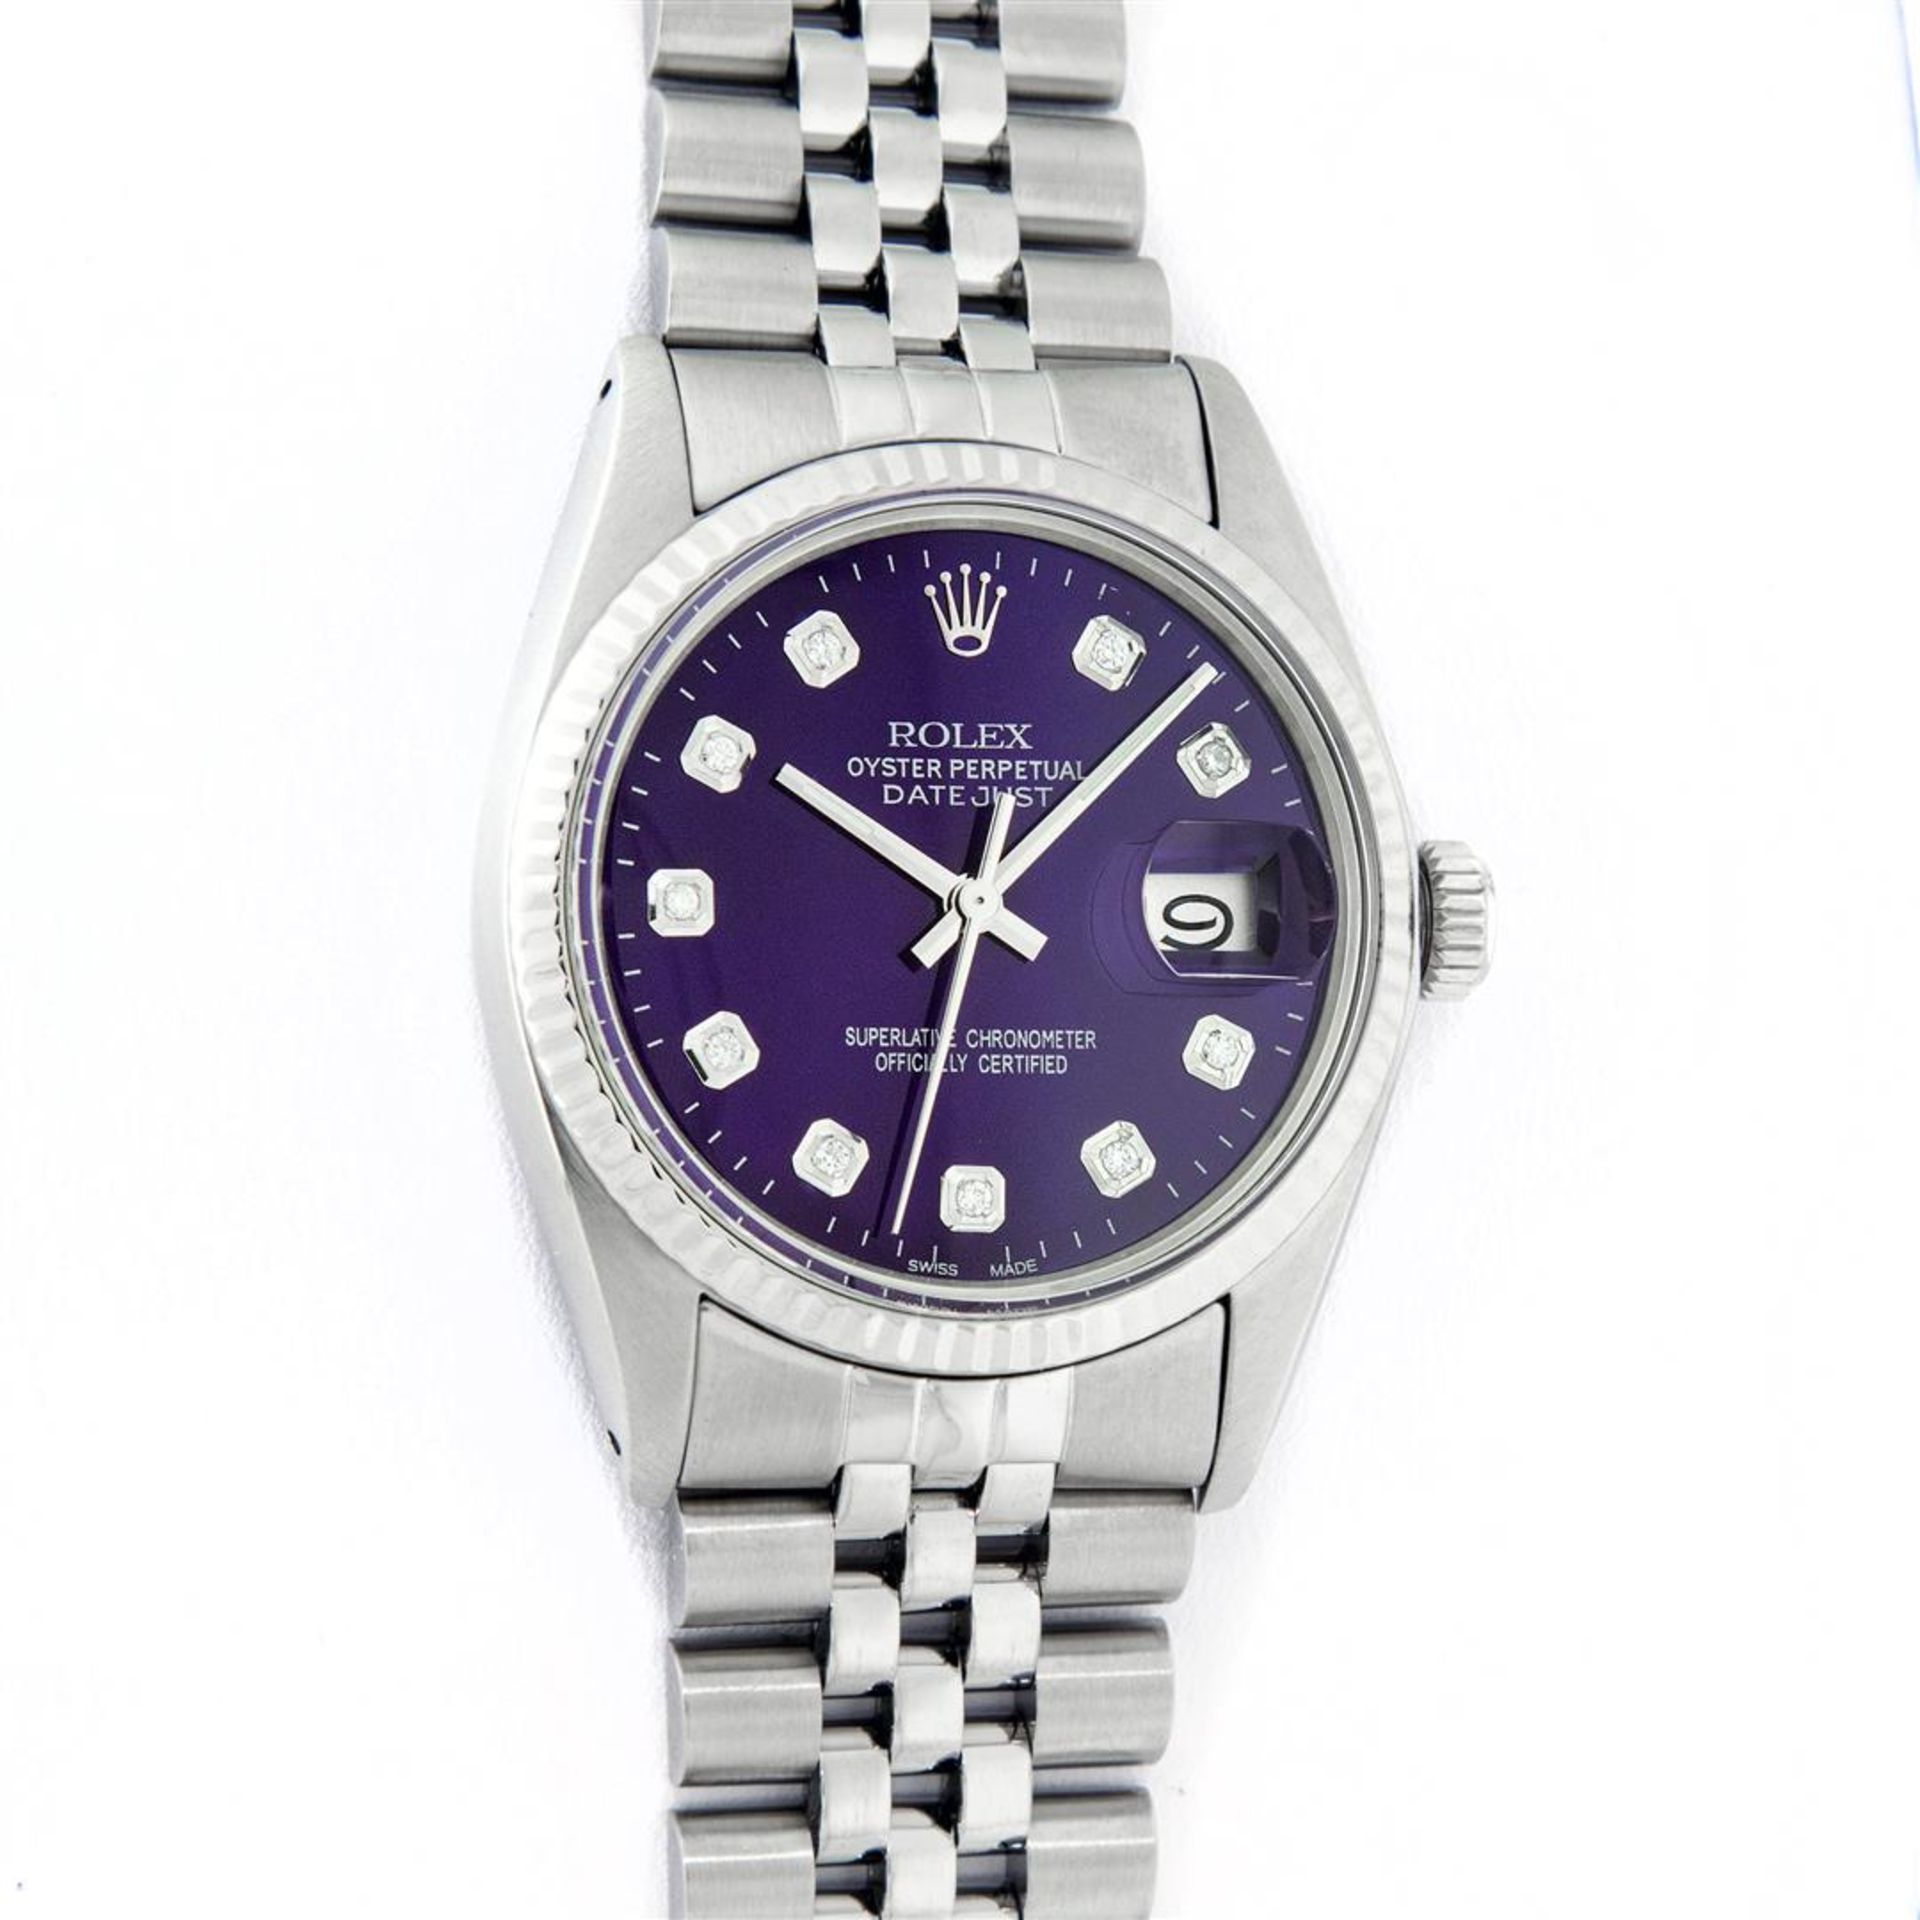 Rolex Mens Stainless Steel Purple Diamond 36MM Datejust Oyster Perpetual Wristwa - Image 2 of 9